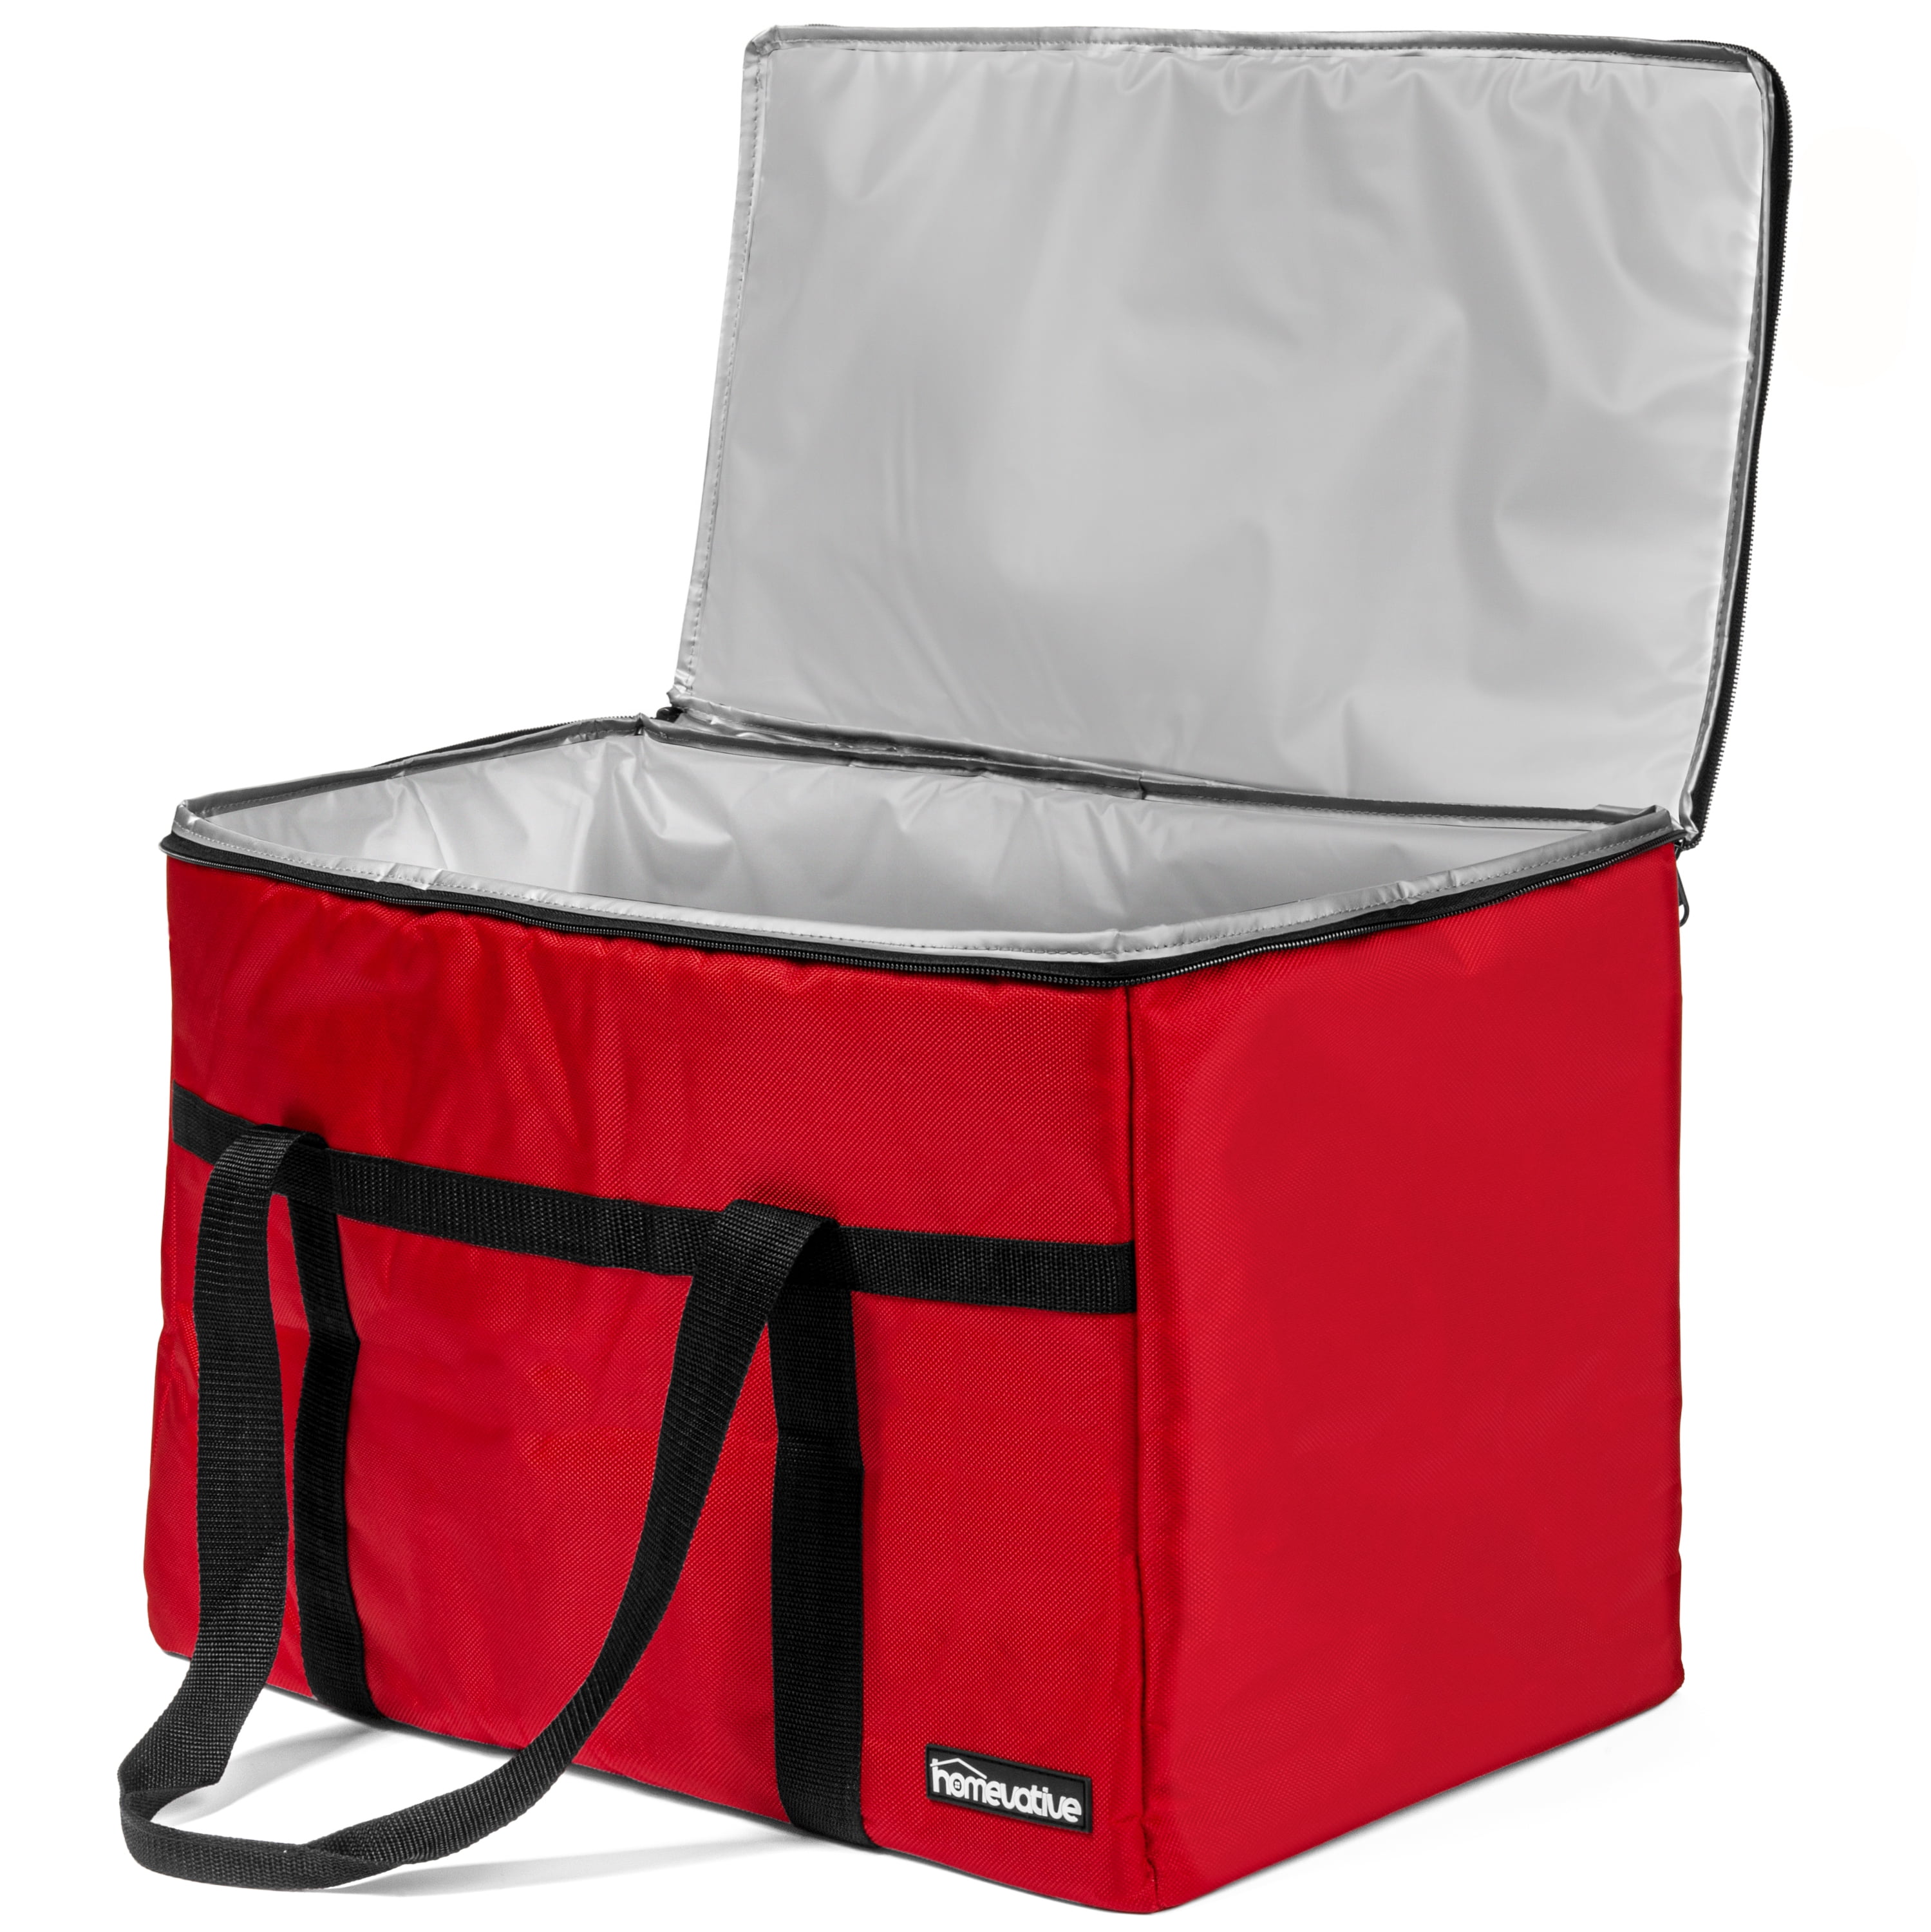 51.4/58.3/74.6L Insulated Lunch Food Delivery Bag Box Warm/Cold Heavy Duty 